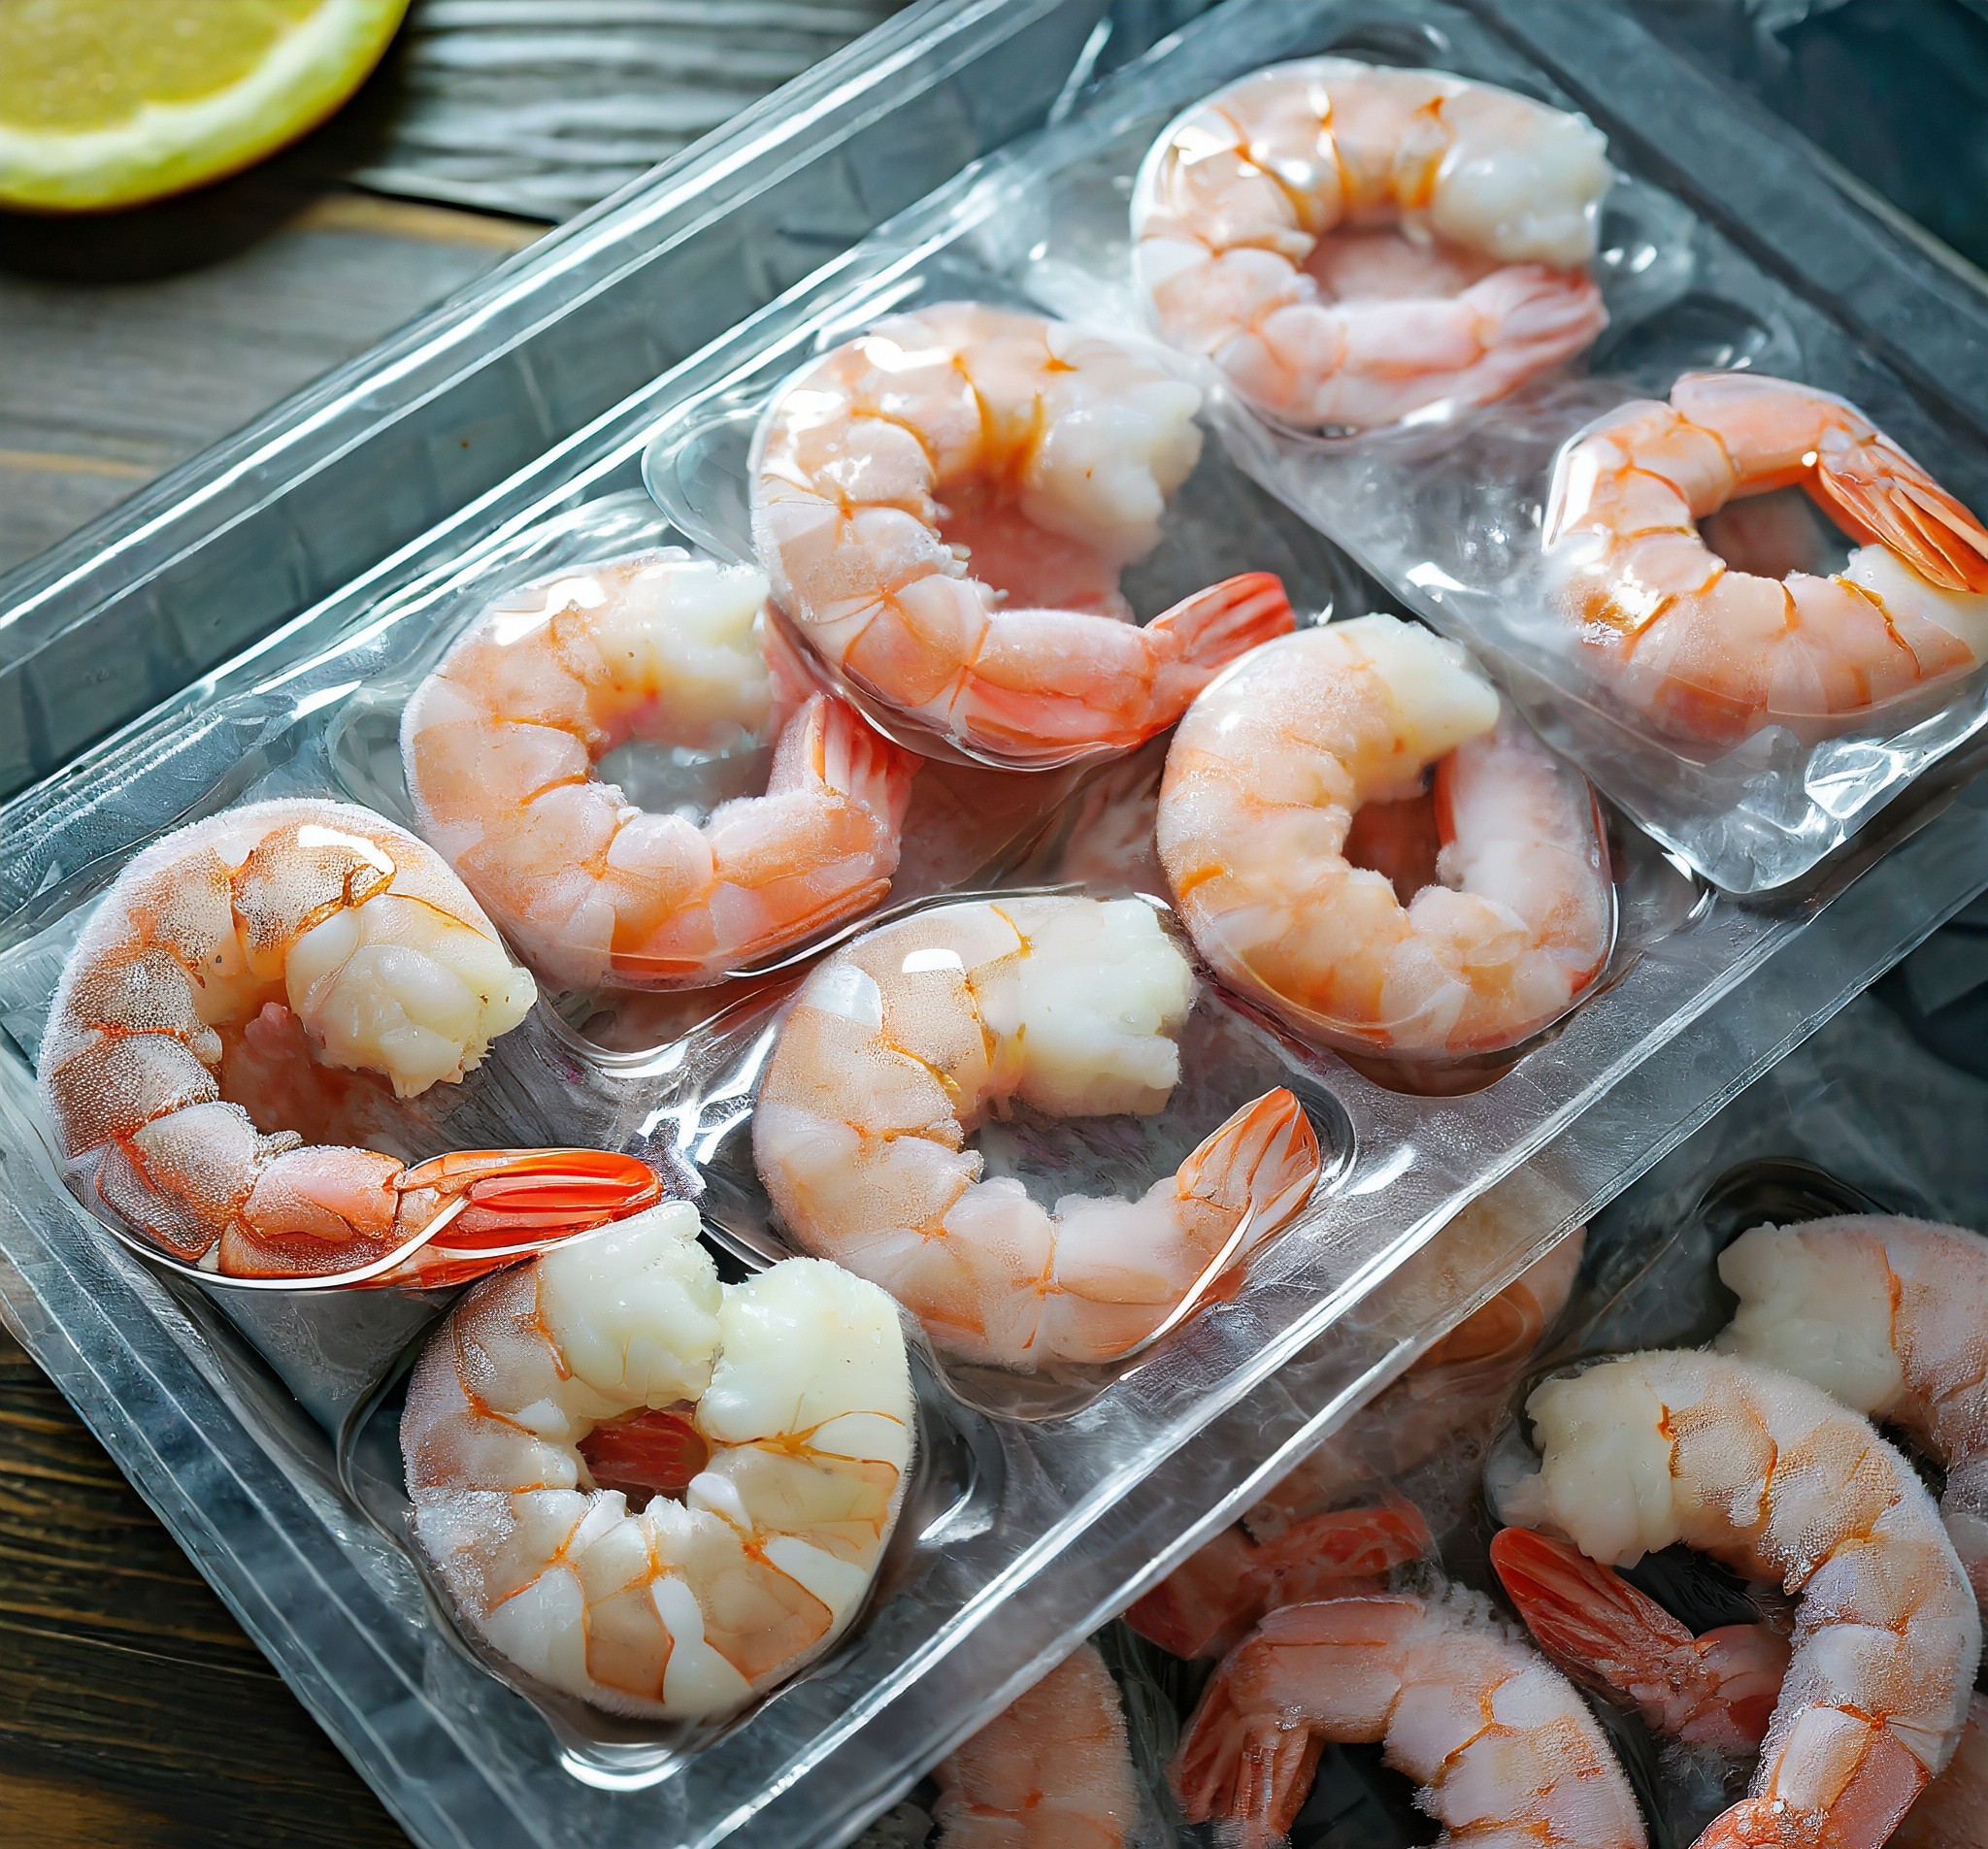 8 Reasons Why Frozen Seafood from India Stands Out